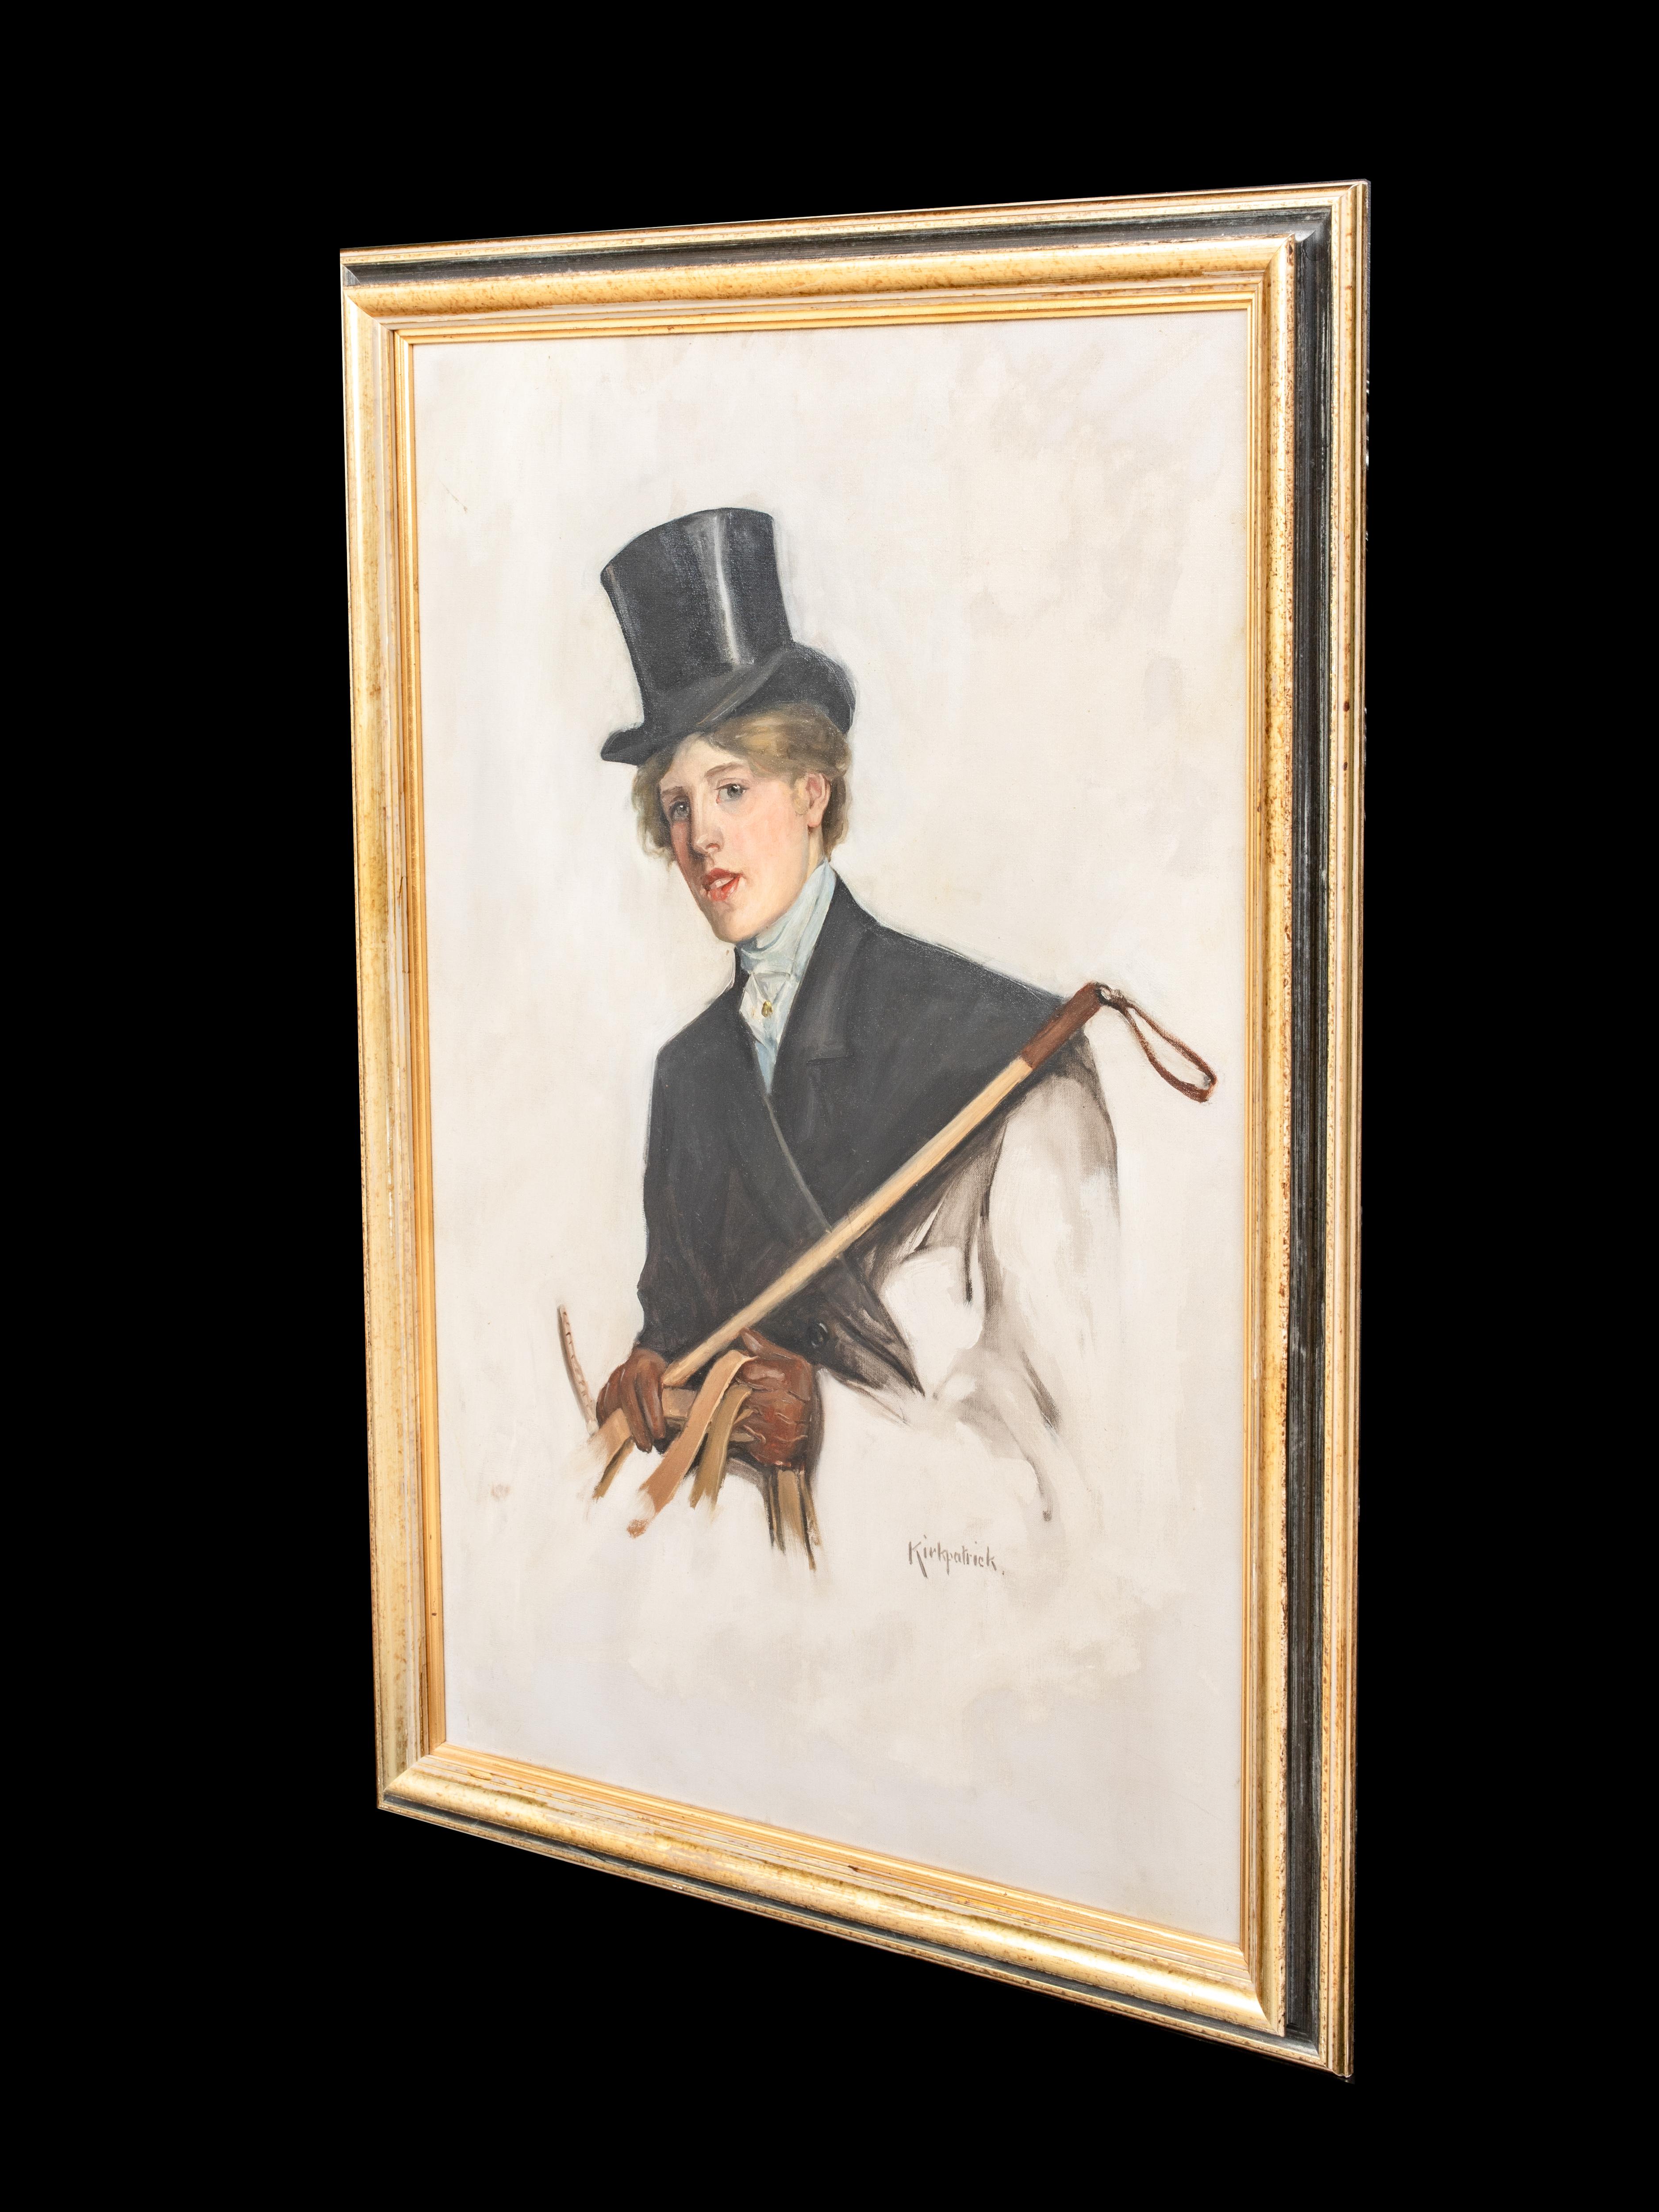 Portrait Of A Lady In Riding Attire, circa 1930 by Ethel KIRKPATRICK (1869-1966) For Sale 5